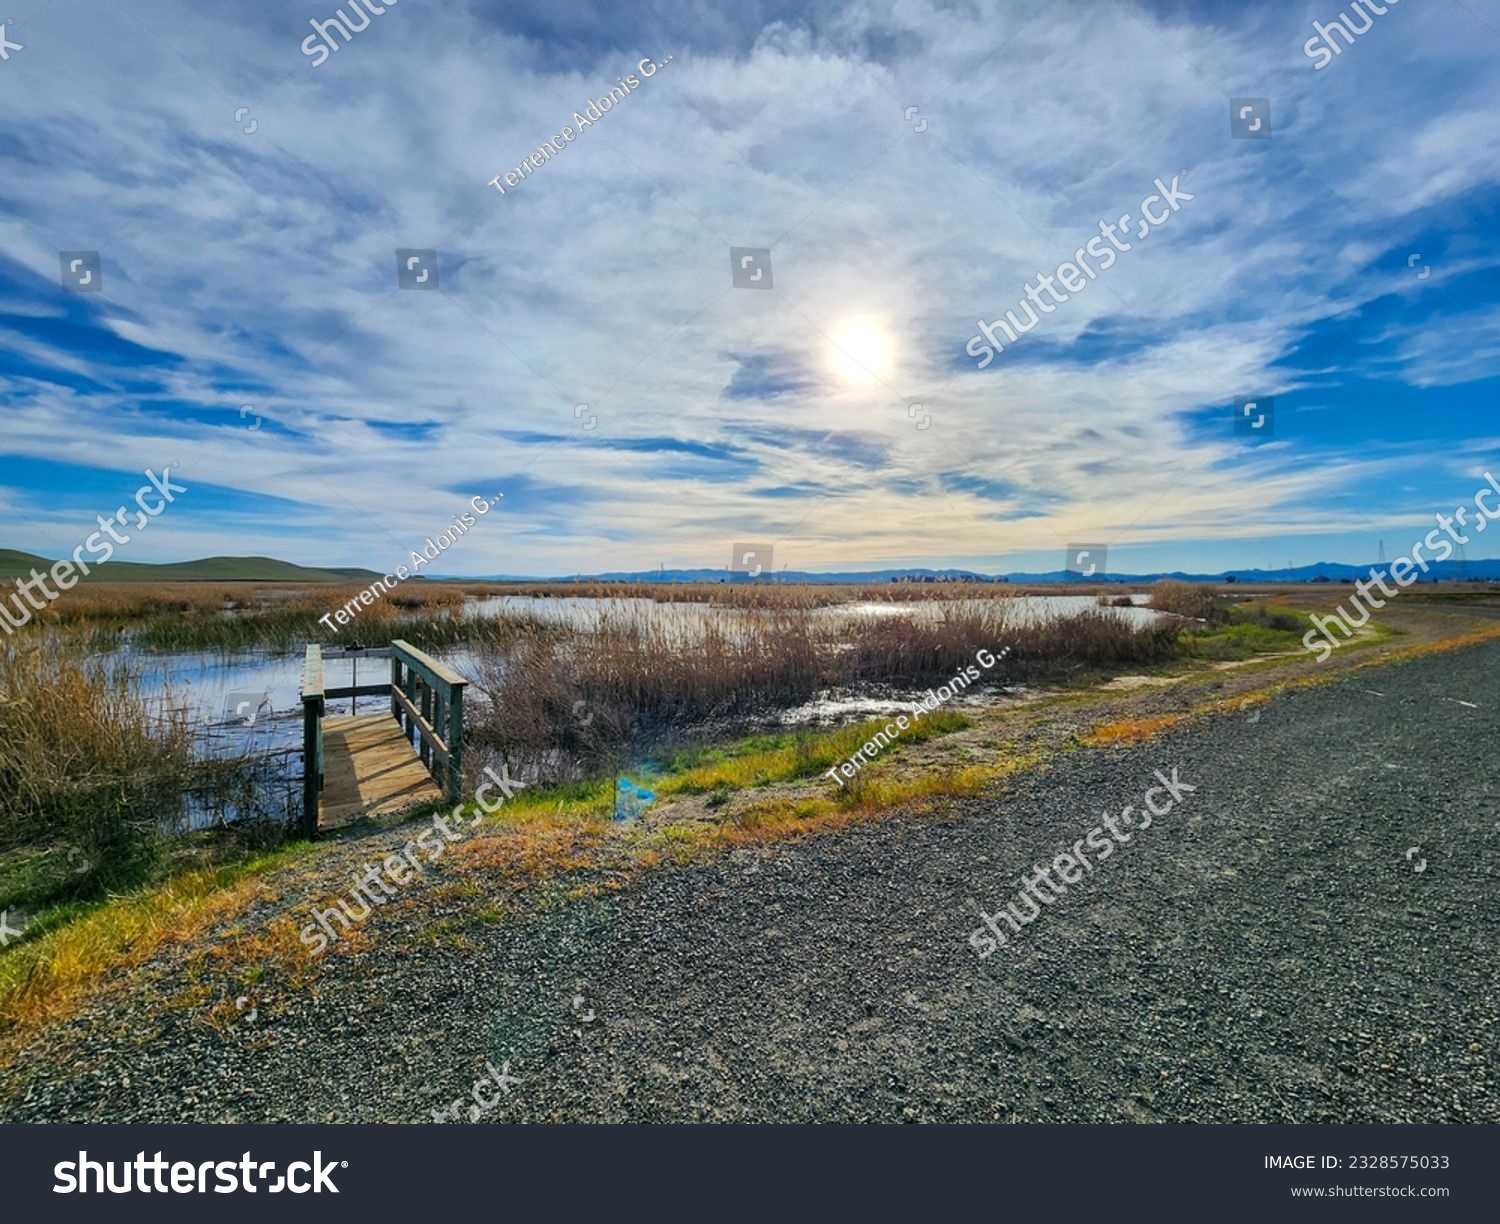 A landscape photo of the Suisun wetlands in northern California  #2328575033